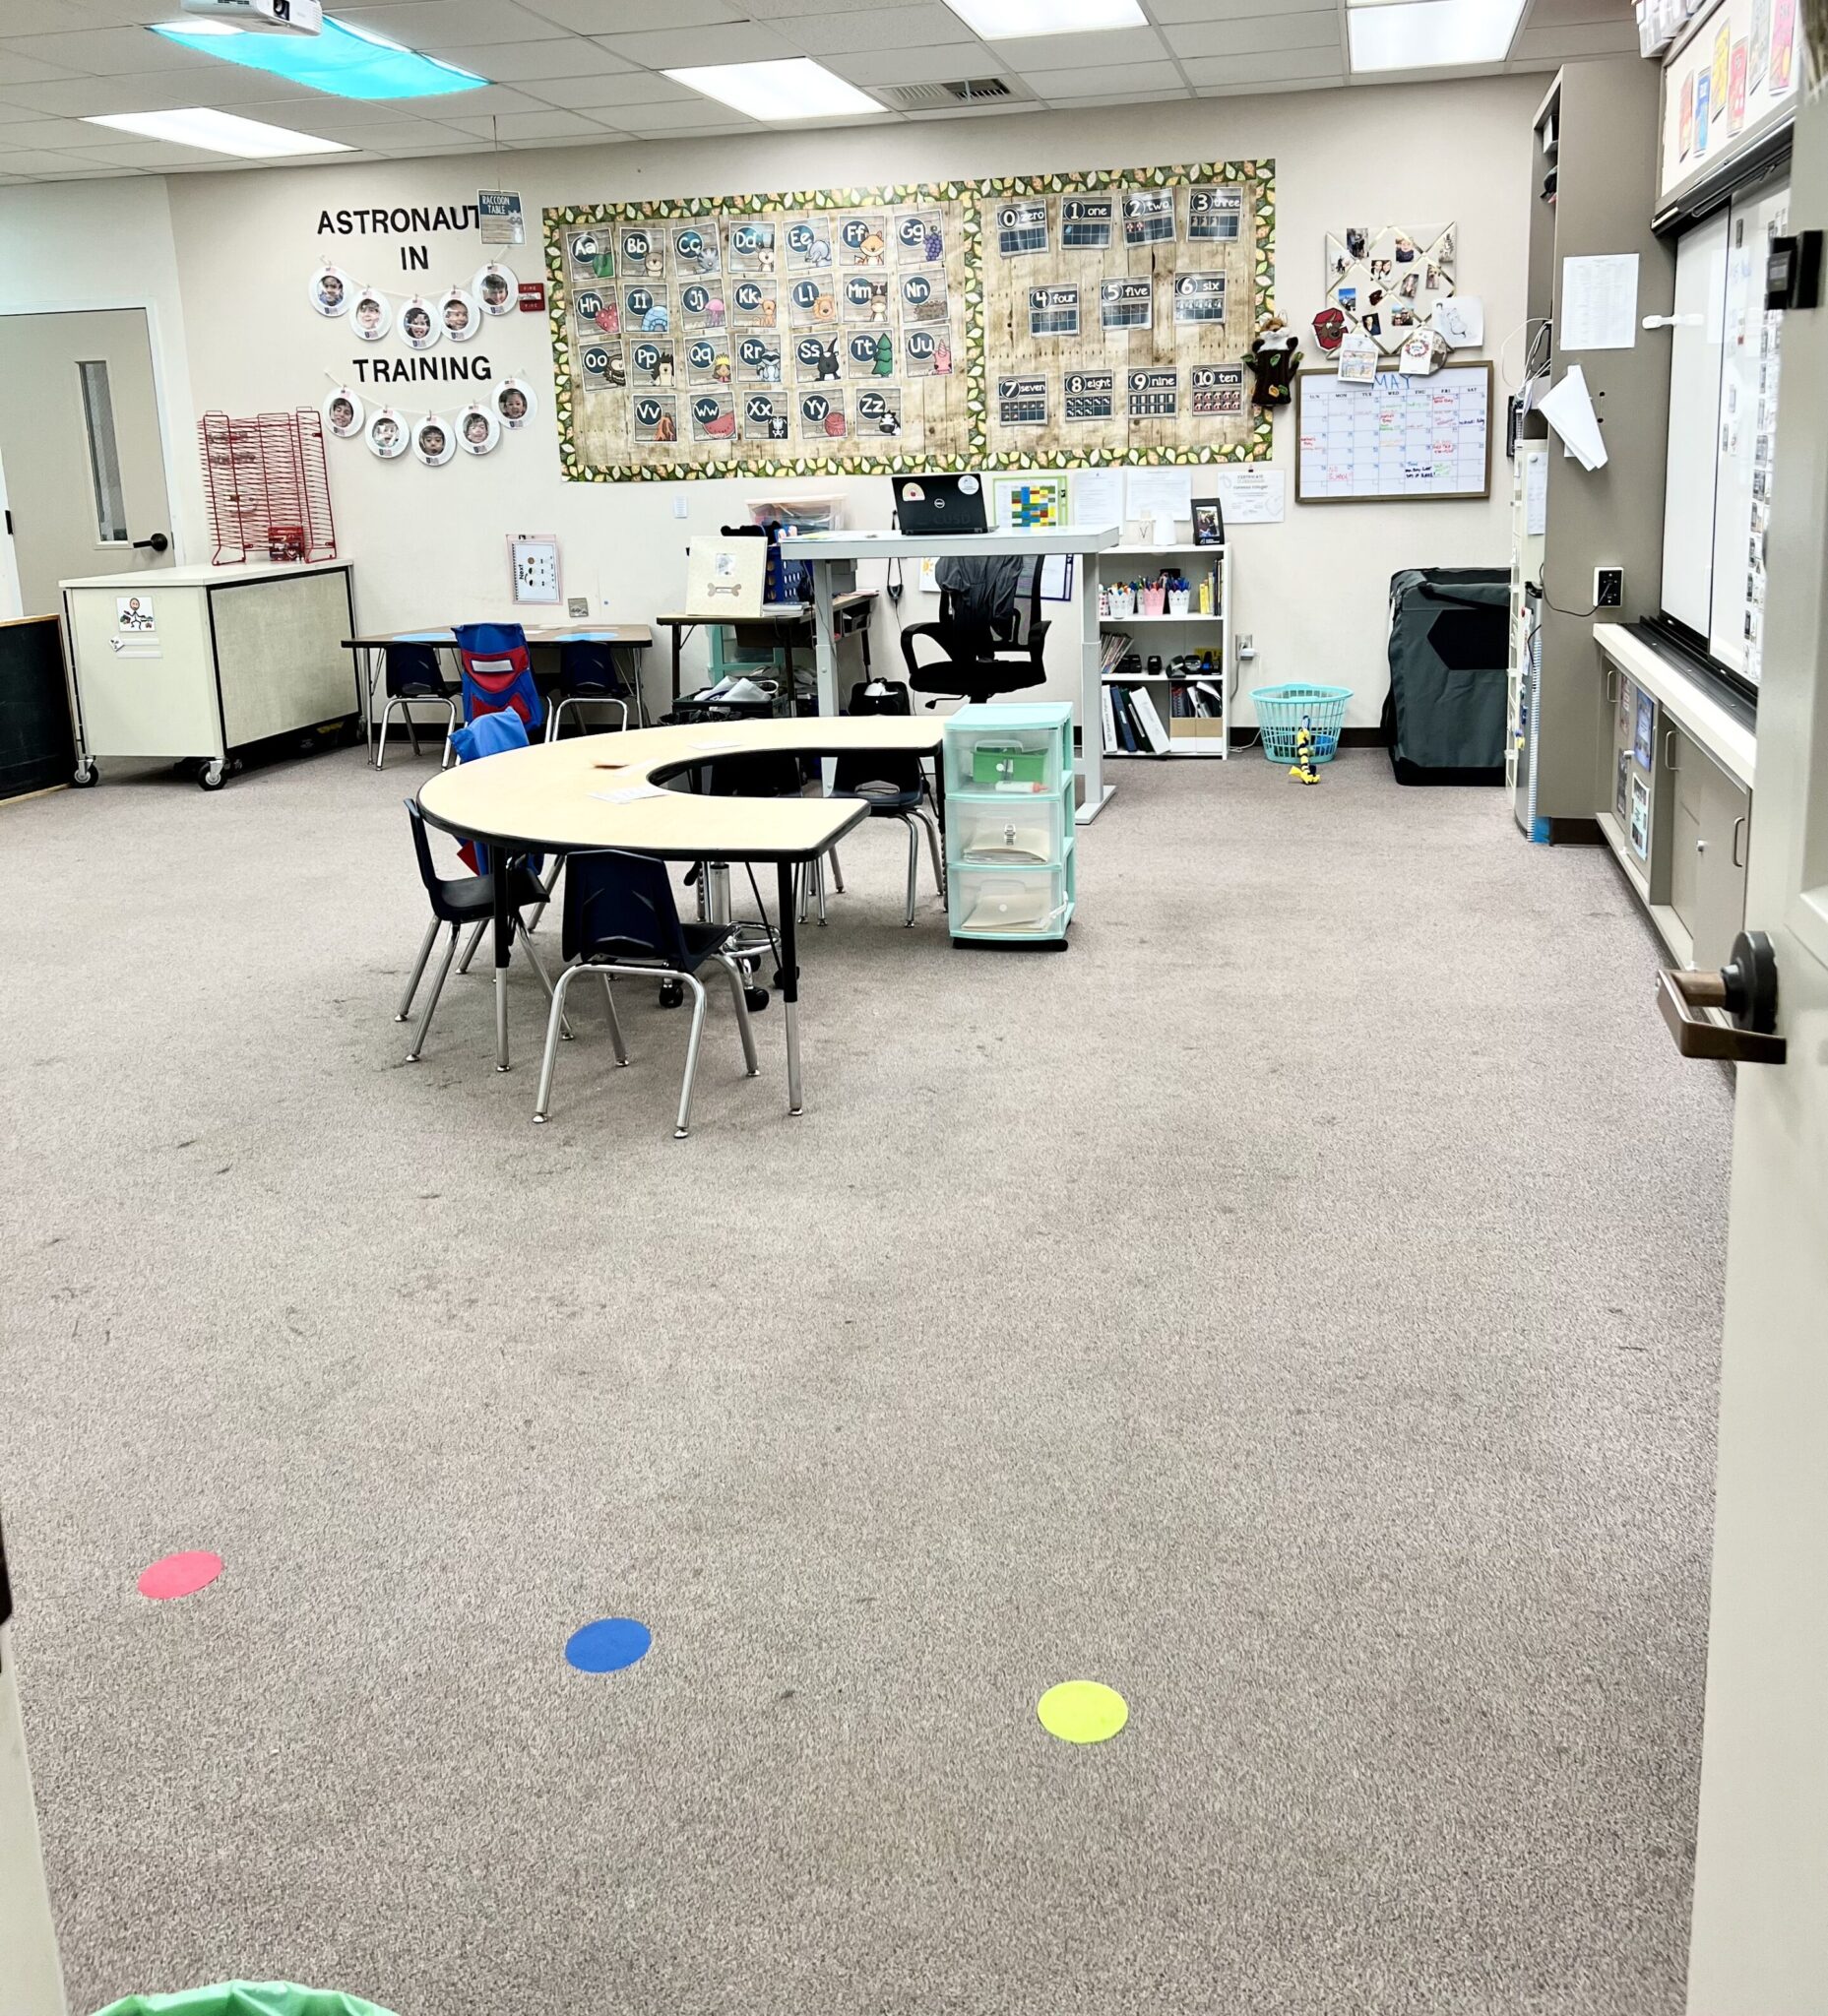 Autism classroom setup with kidney table in center and colored velcro dots on floor for lining up. 